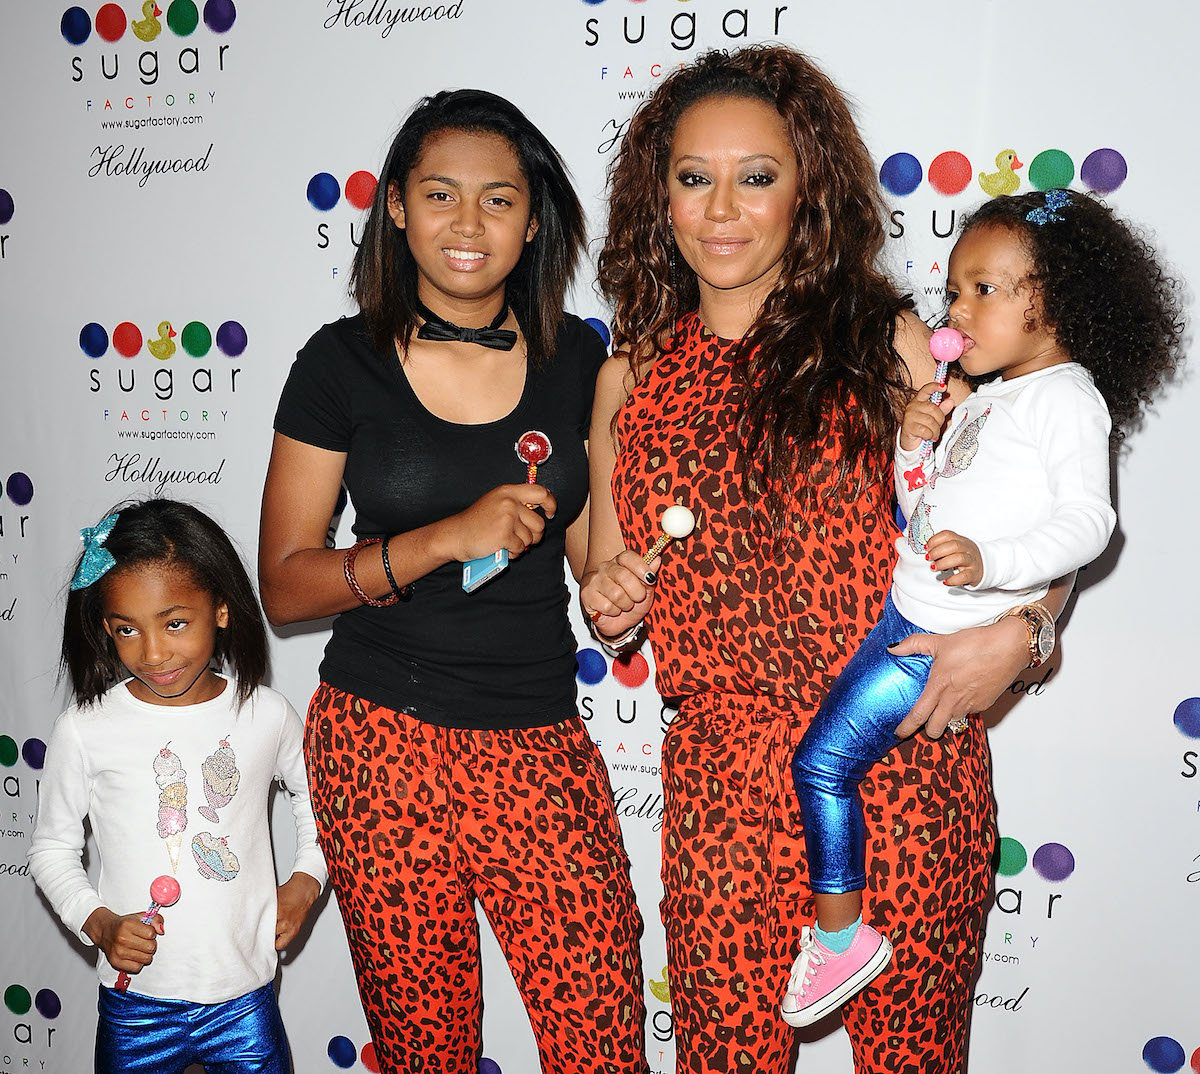 Melanie "Mel B" Brown and her daughters (L-R) Angel Iris Murphy Brown, Phoenix Chi Gulzar and Madison Brown Belafonte attend the grand opening of Sugar Factory Hollywood on November 13, 2013 in Hollywood, Californi